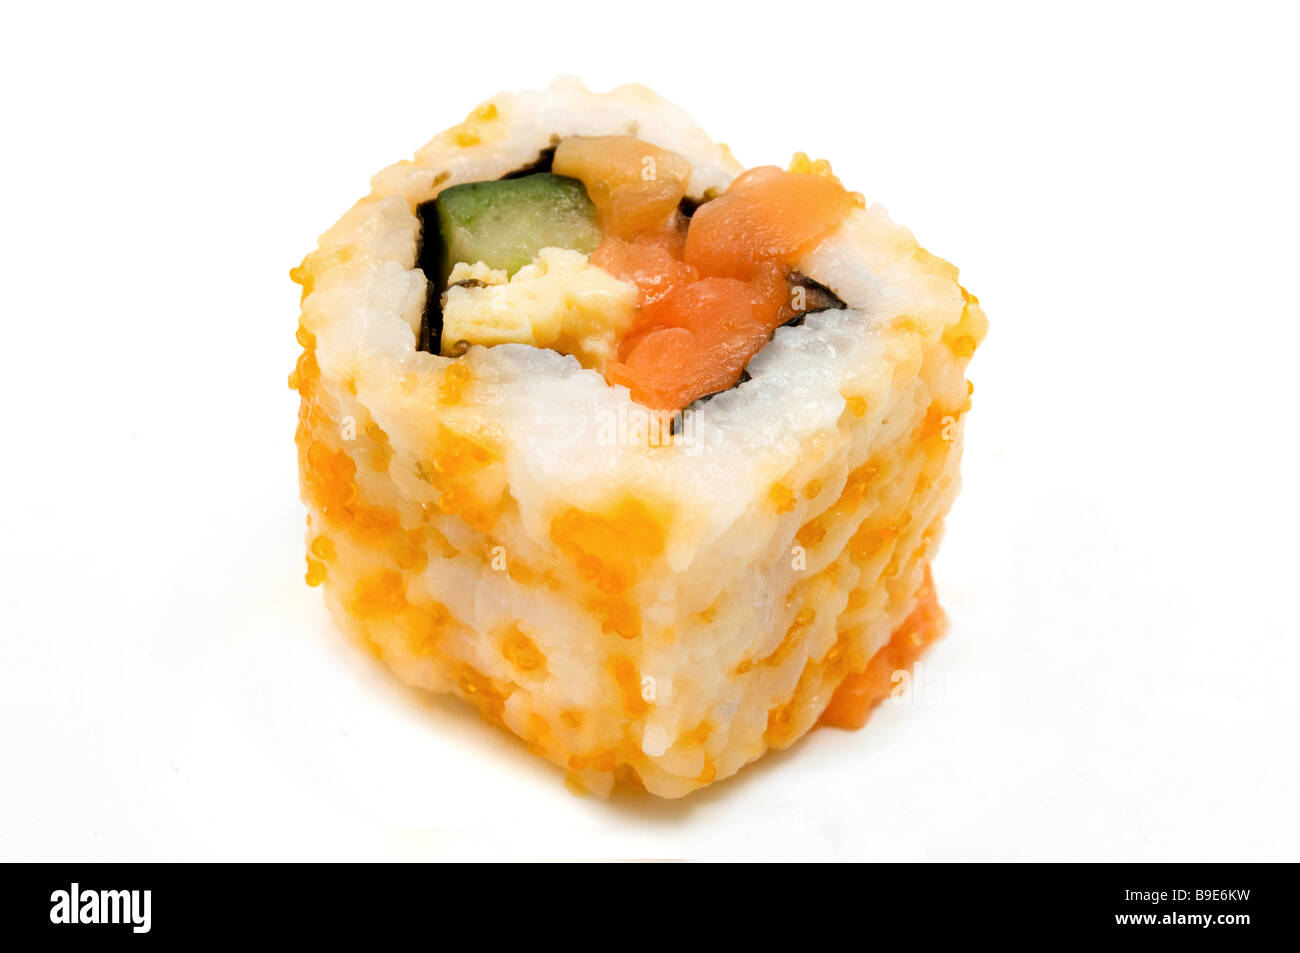 Sushi california roll on a white background Stock Photo